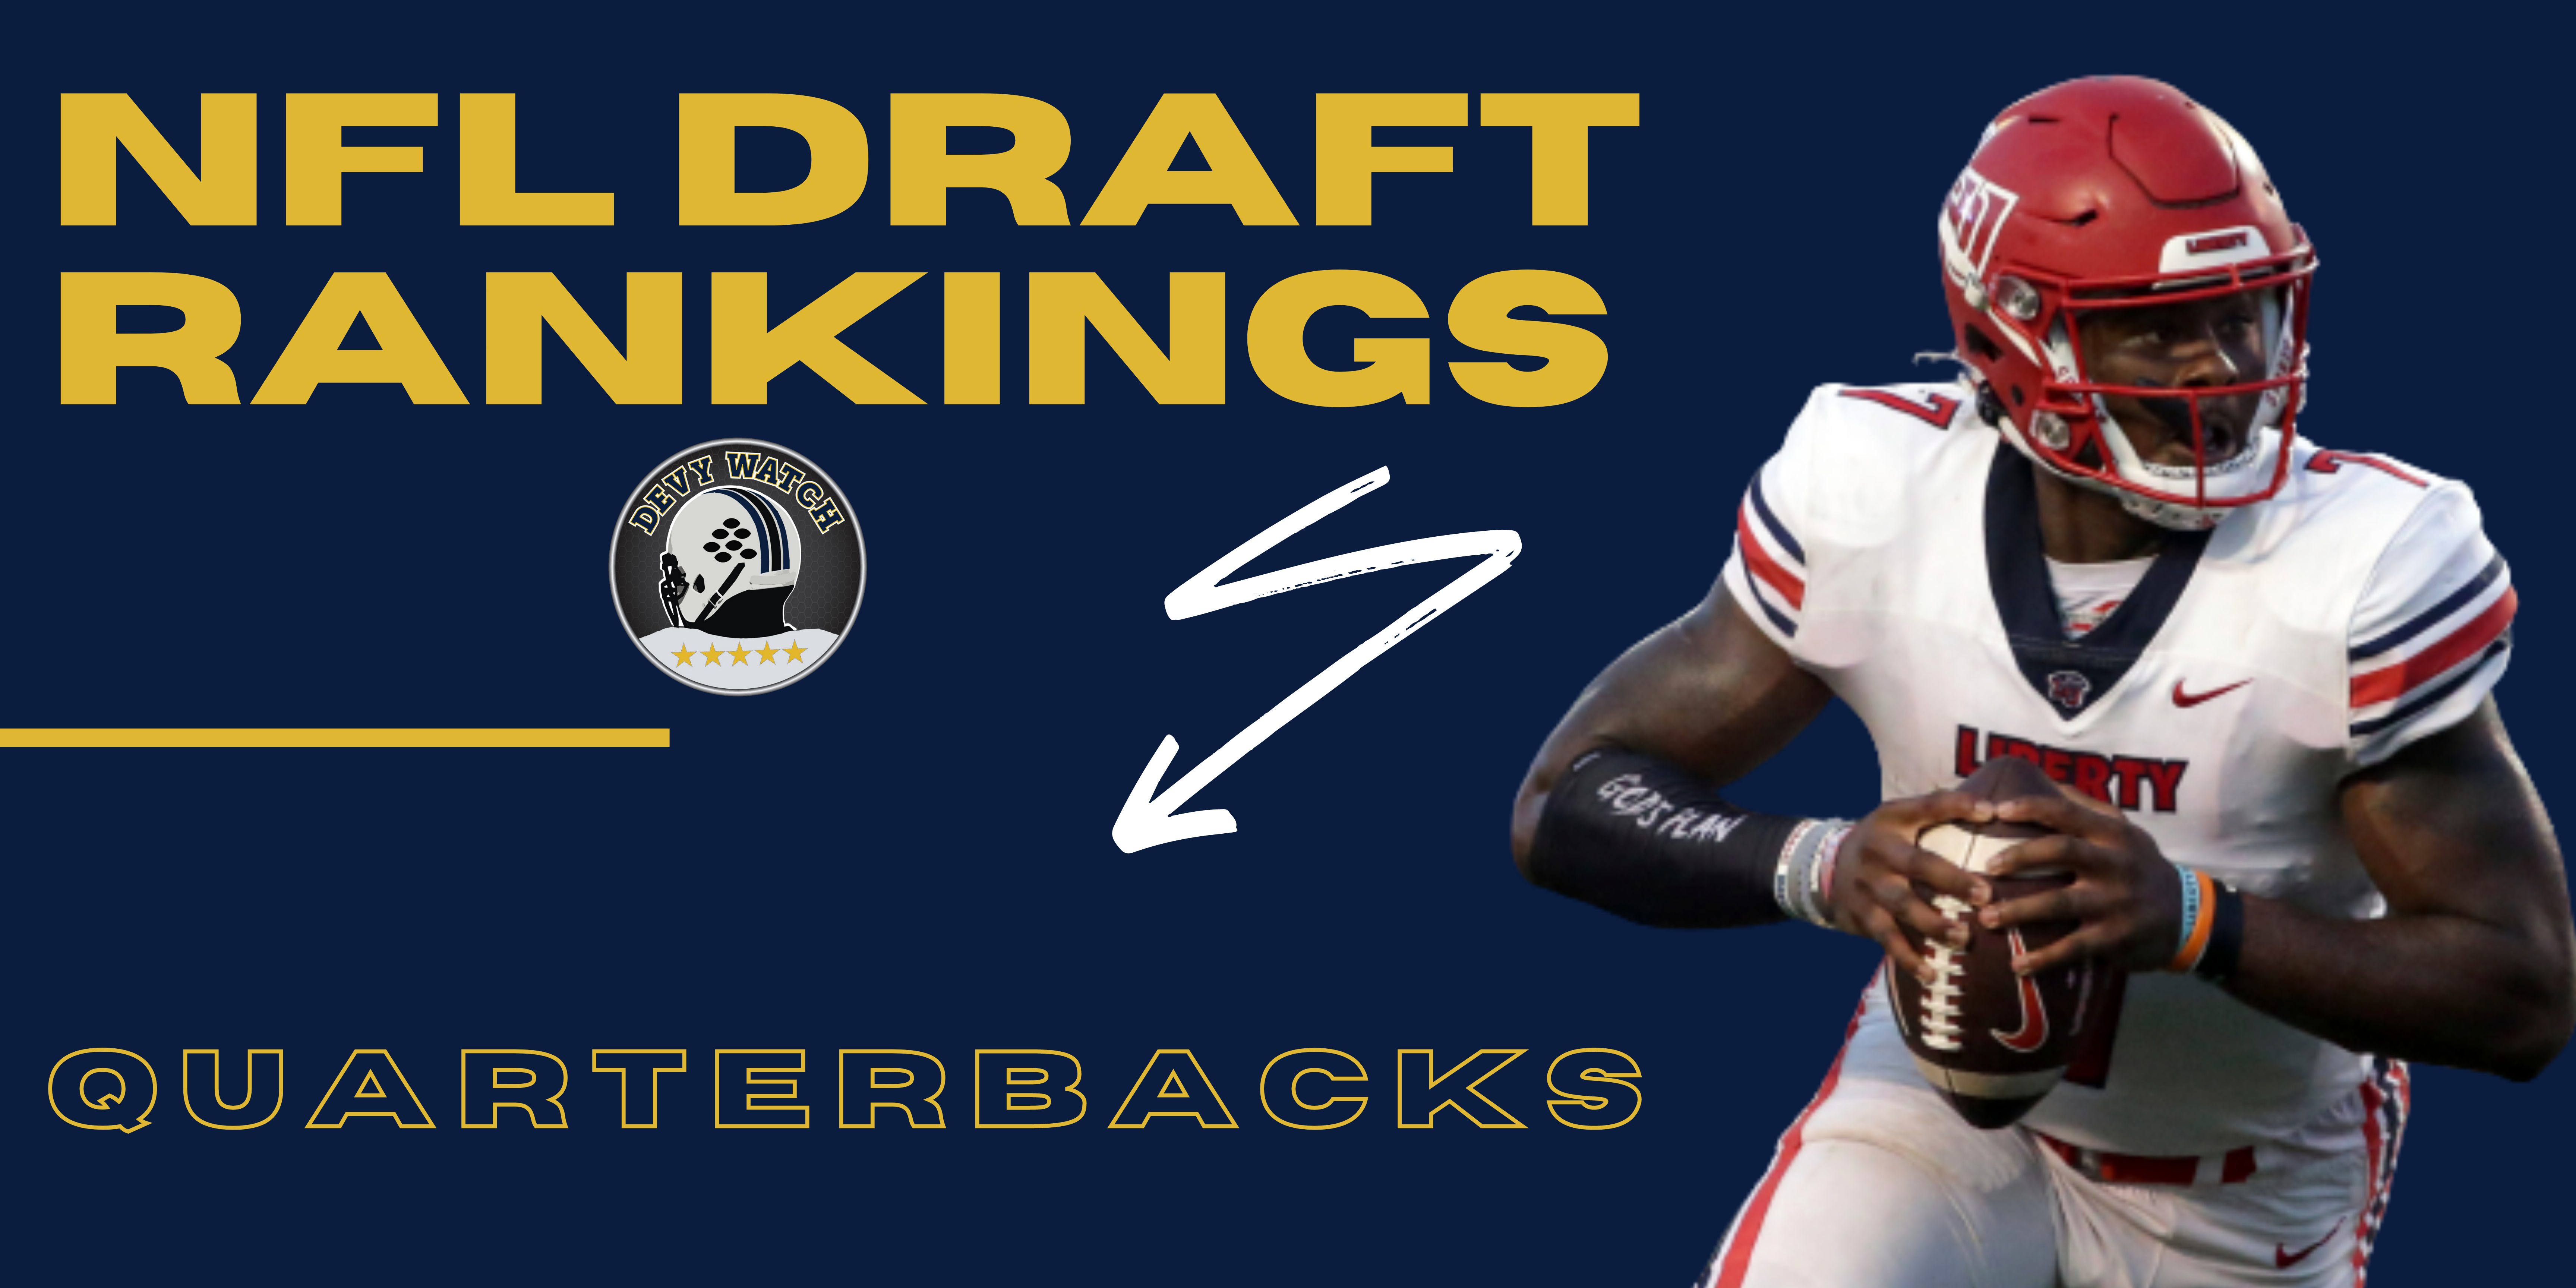 NFL: Ranking The Top 50 Quarterbacks For 2022 - Visit NFL Draft on Sports  Illustrated, the latest news coverage, with rankings for NFL Draft  prospects, College Football, Dynasty and Devy Fantasy Football.